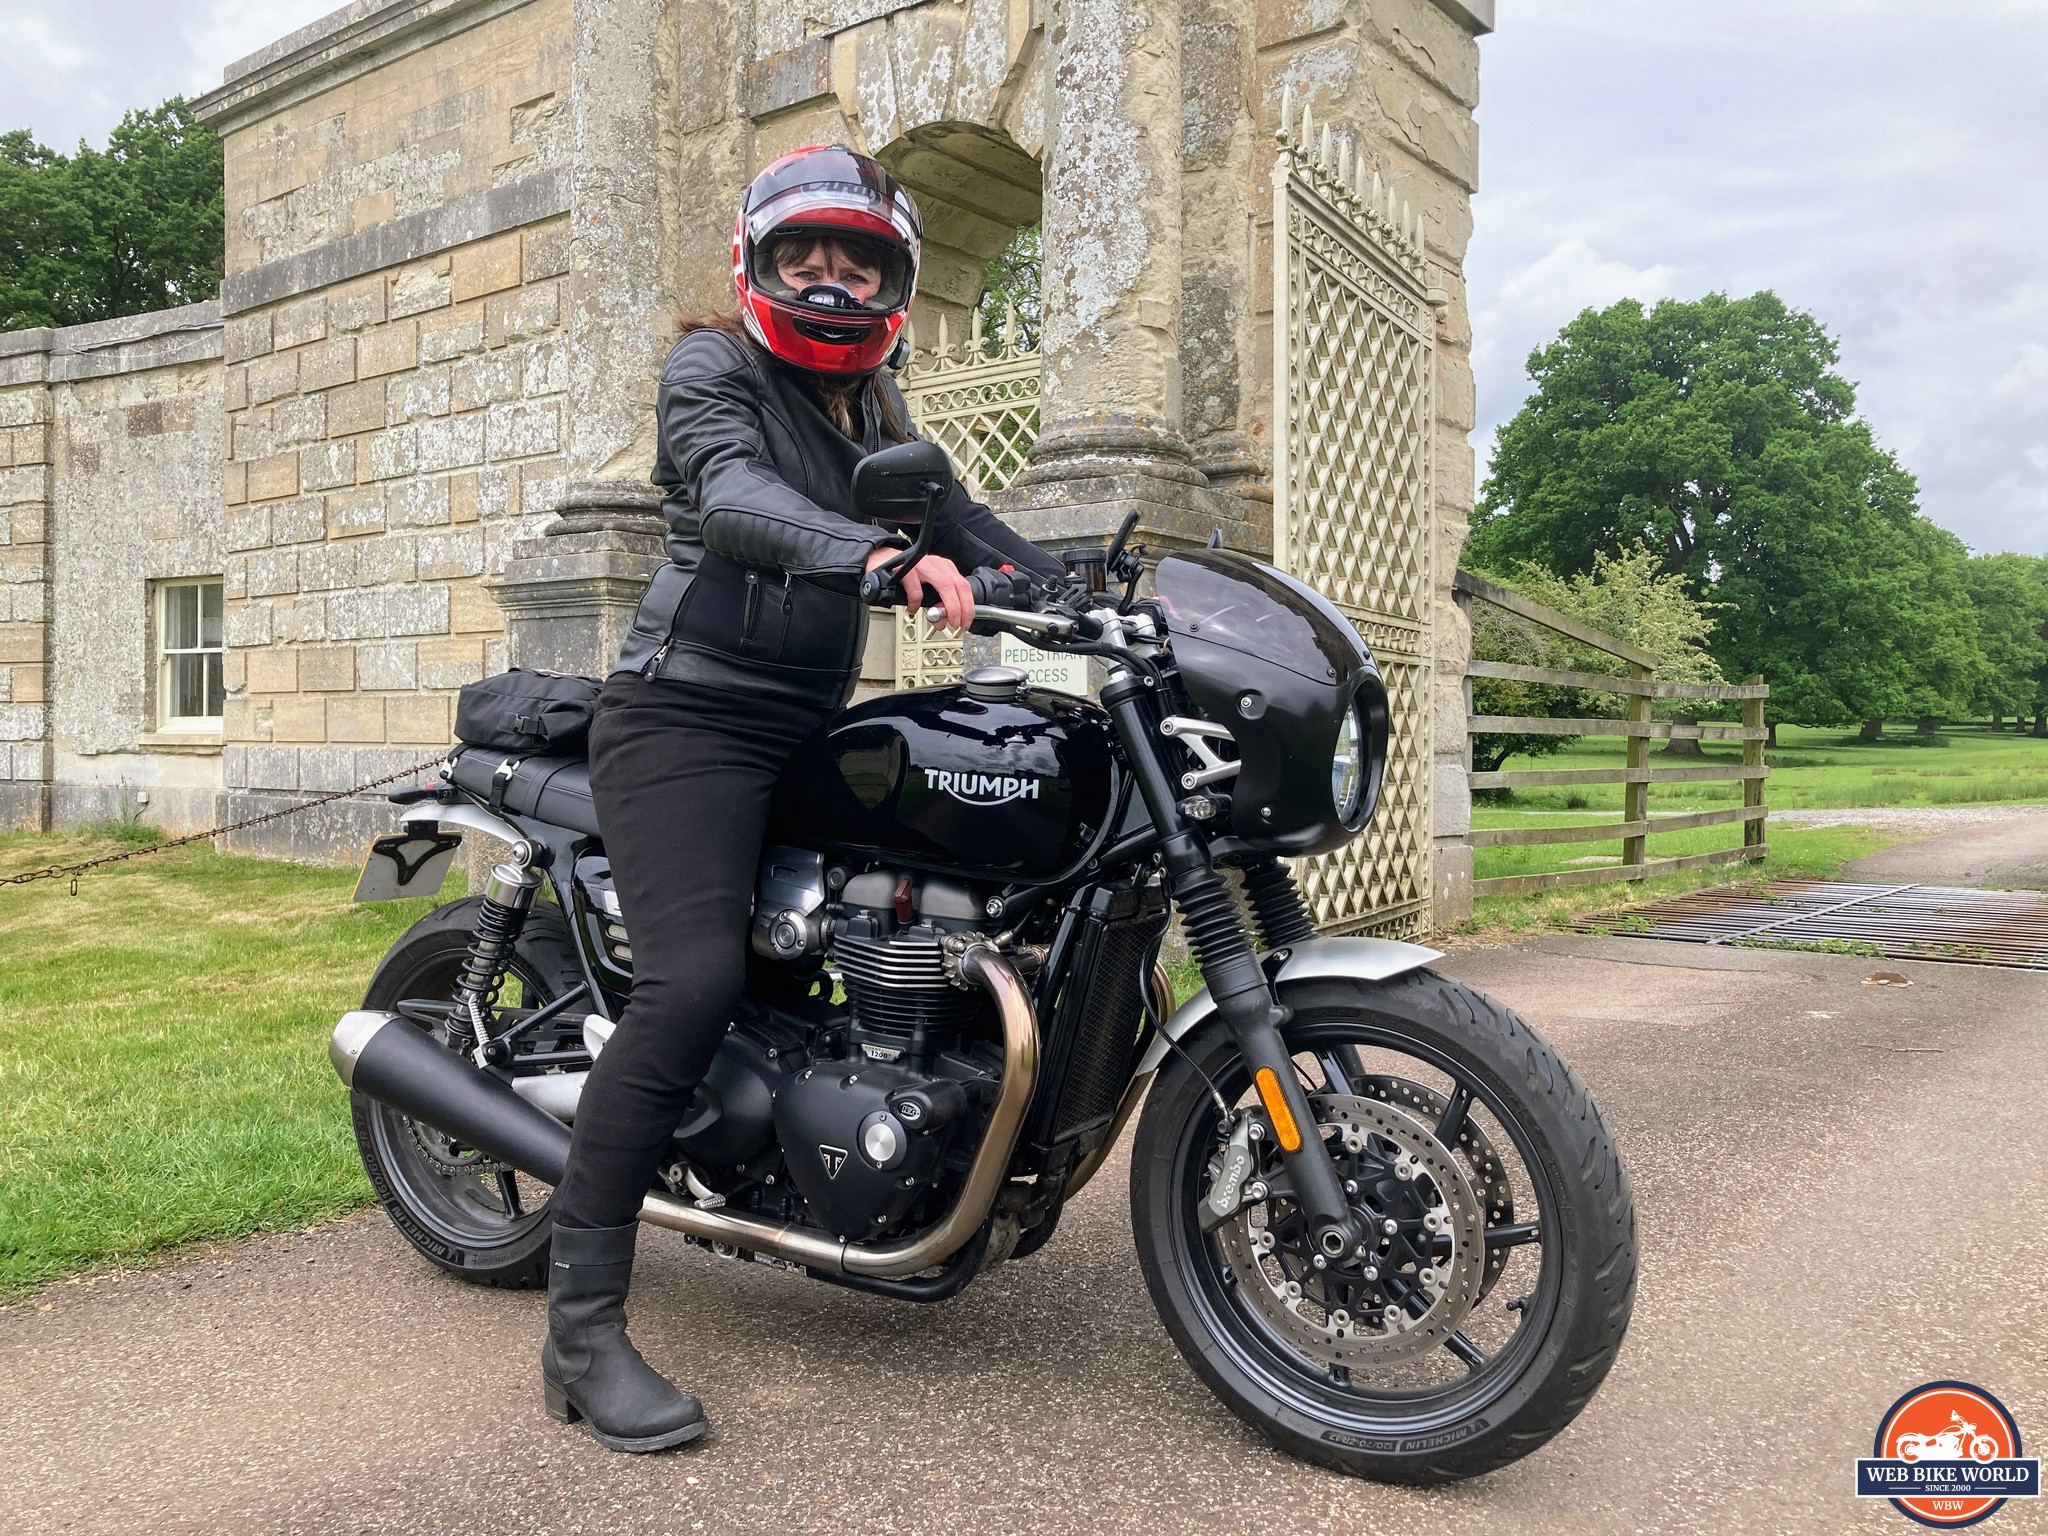 Oxford Products AA Original Approved Leggings Review | Honda NC700 Forum